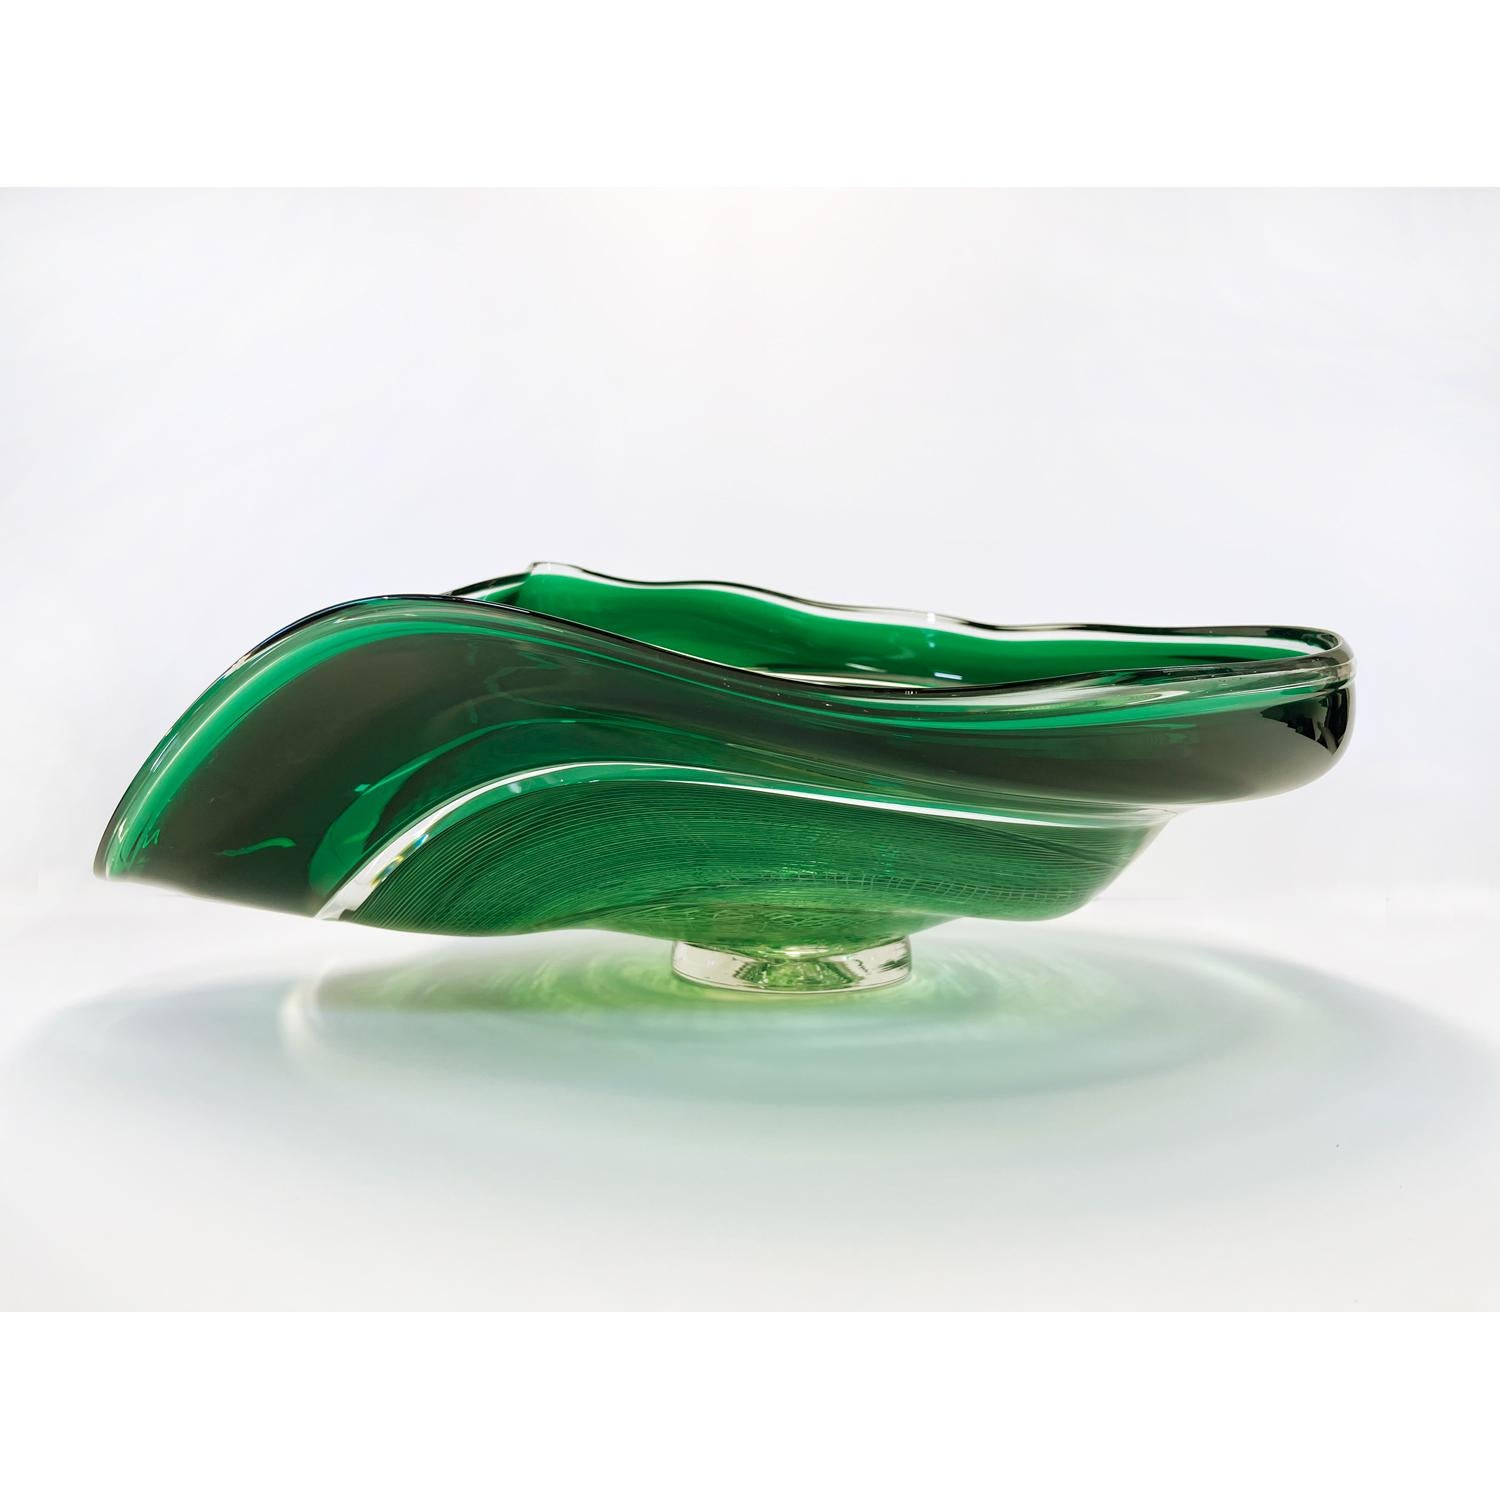 Emerald Rondelle Bowl, Modern Canadian Glass Sculpture, 2023 - Abstract Art by David Thai